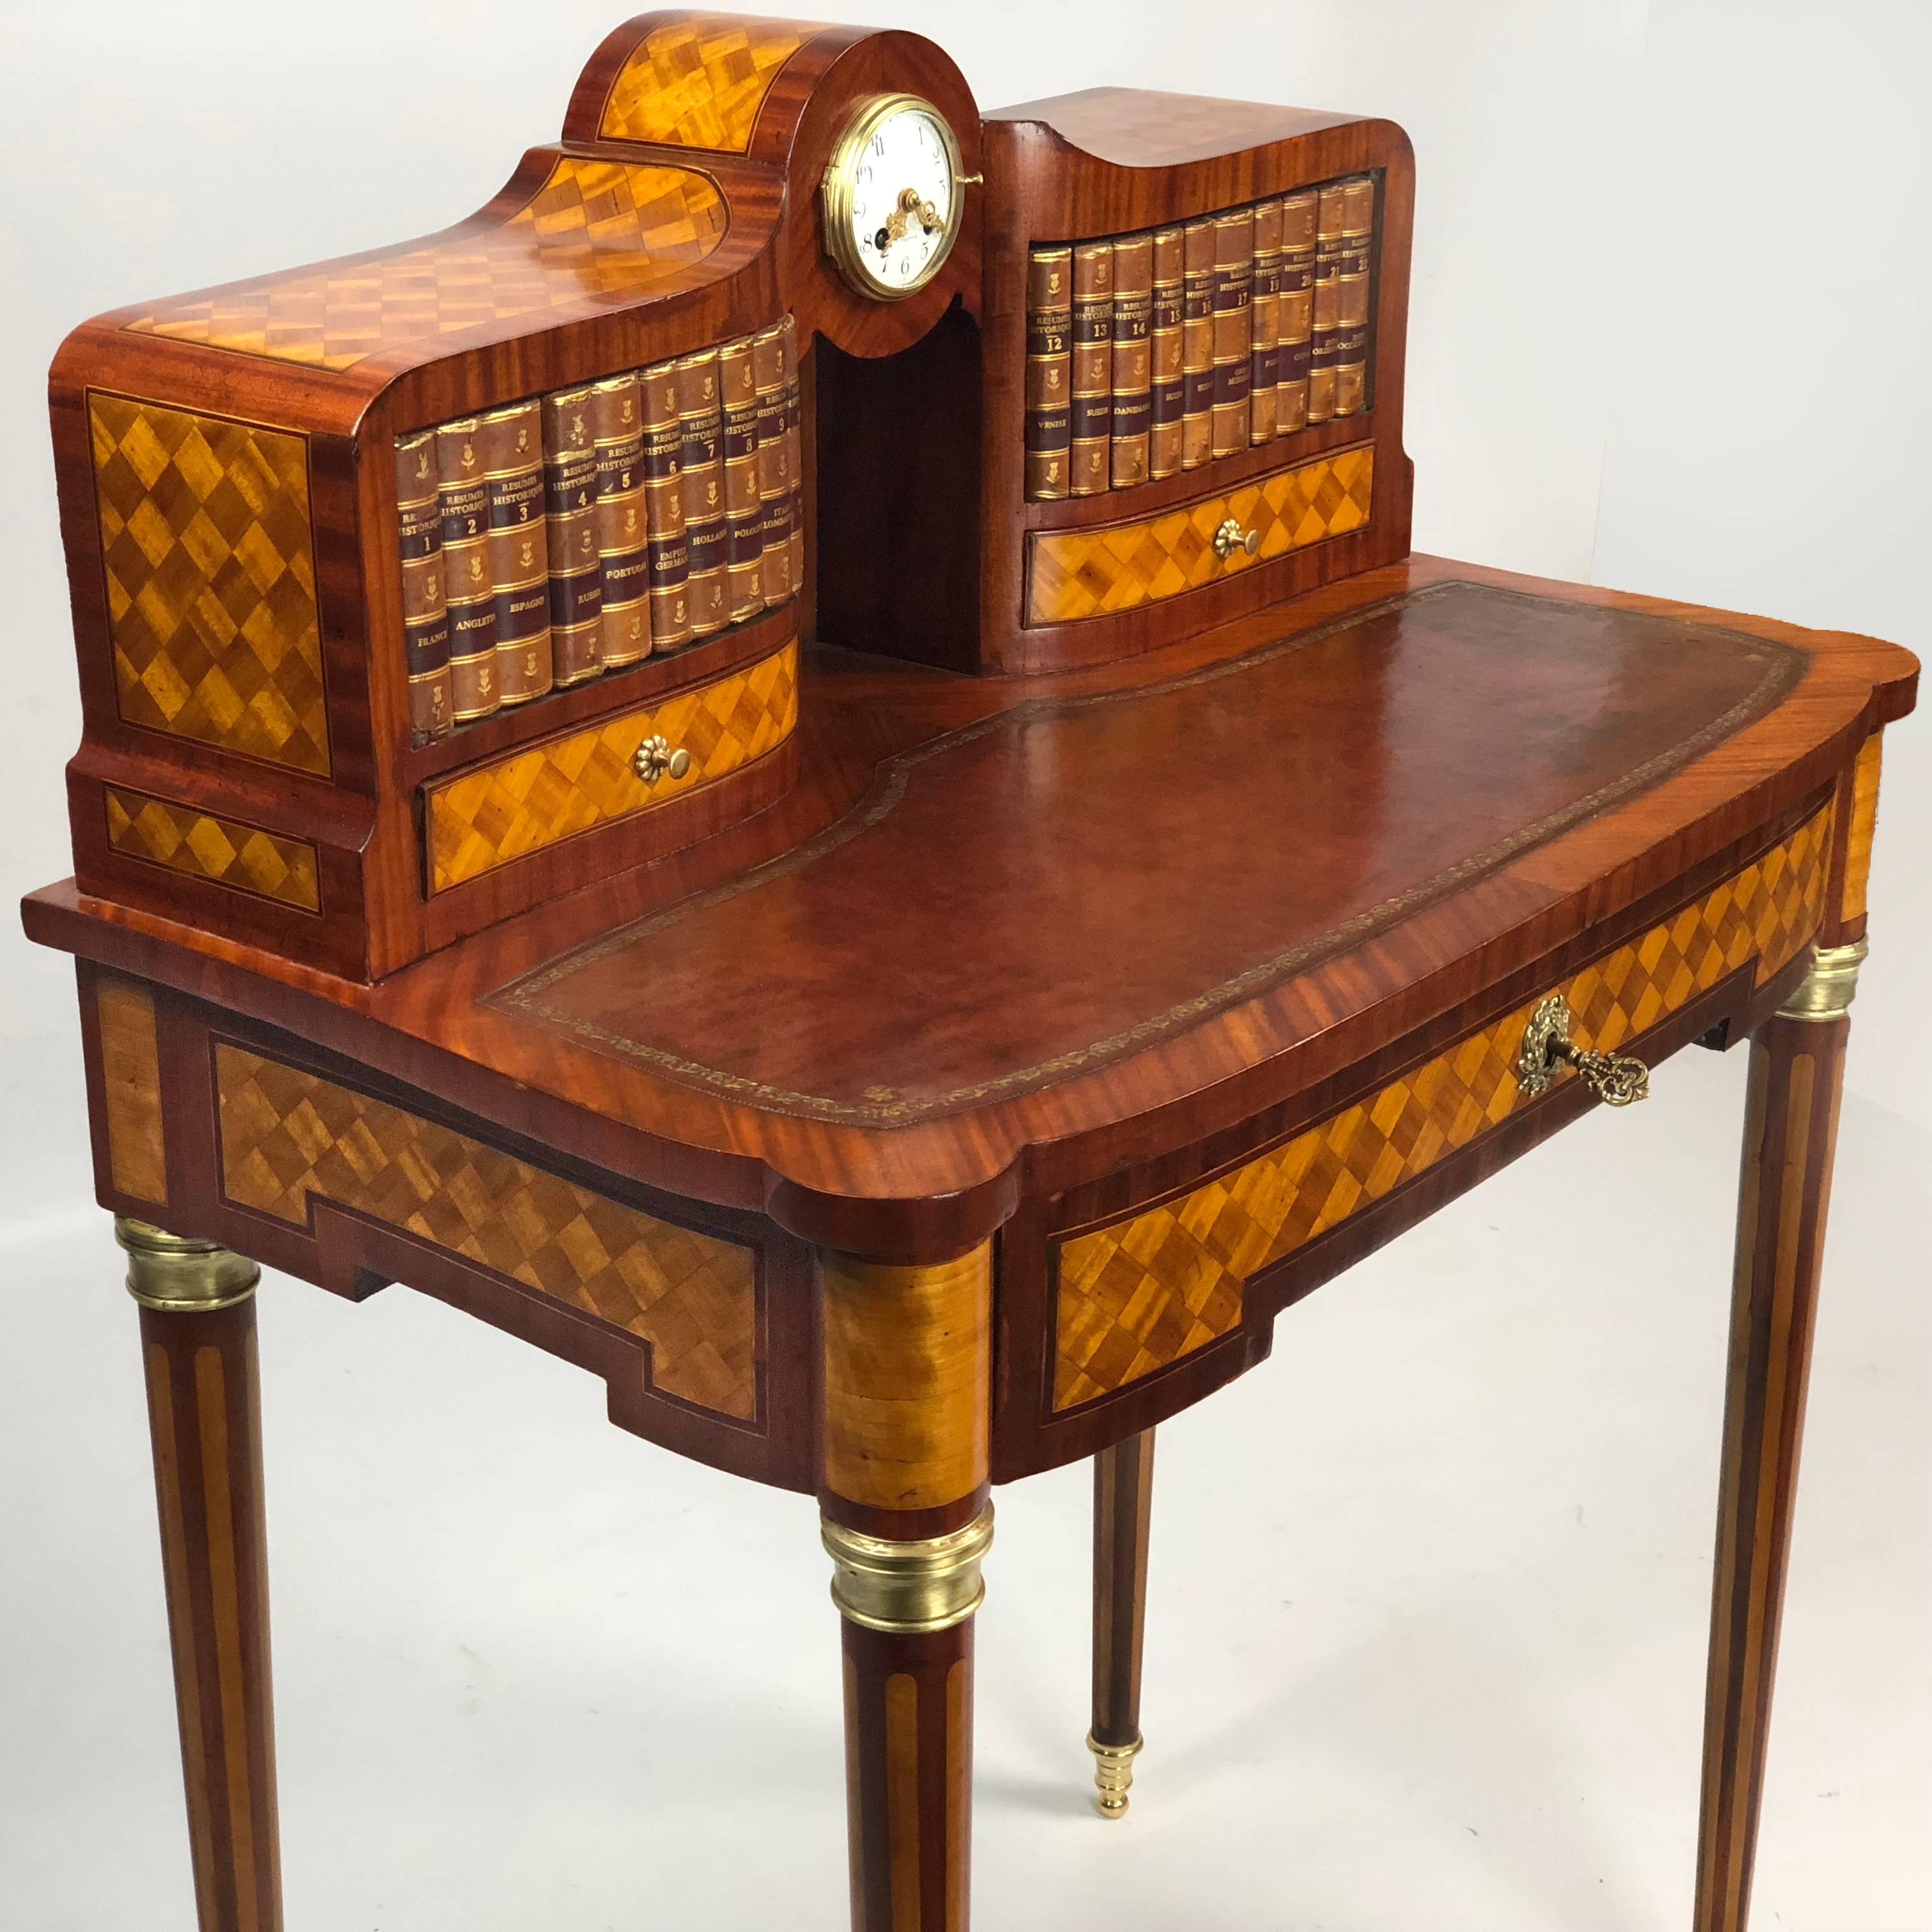 Marquetry Bonheur du Jour with Clock 19th Century French Desk 